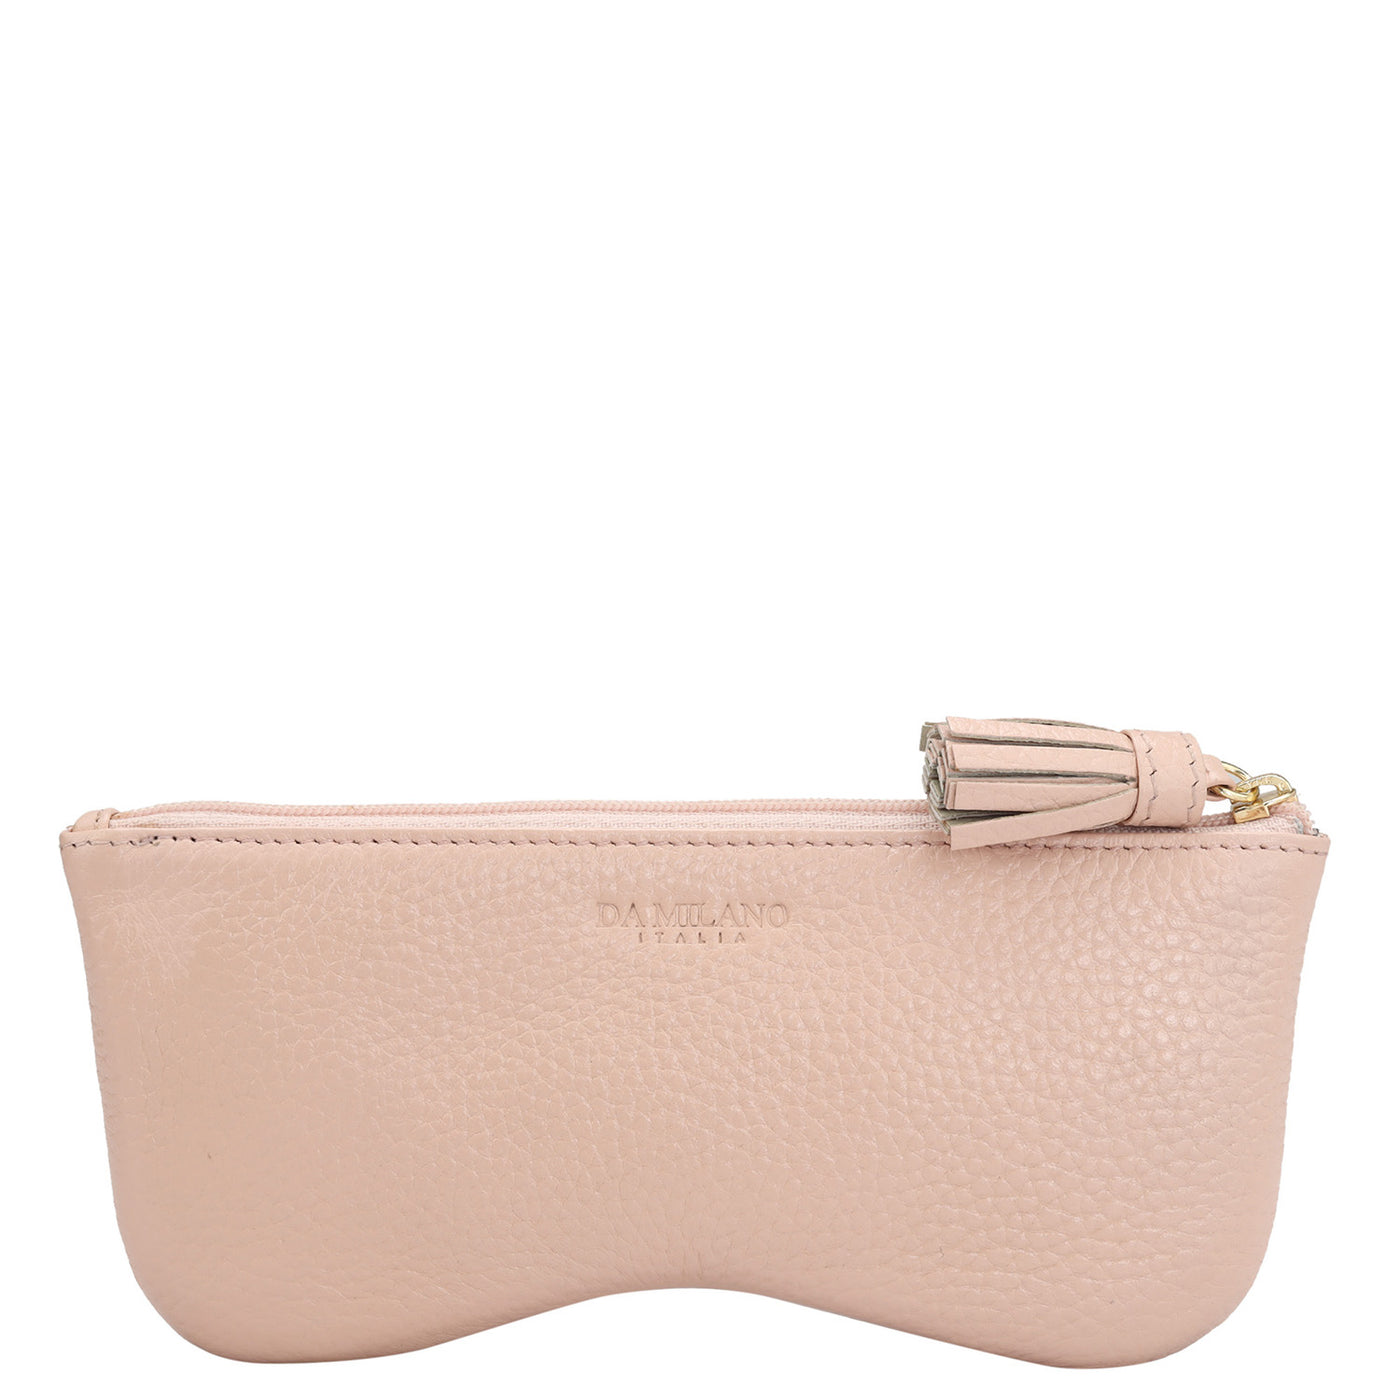 Wax Leather Spectacle Case - Baby Pink